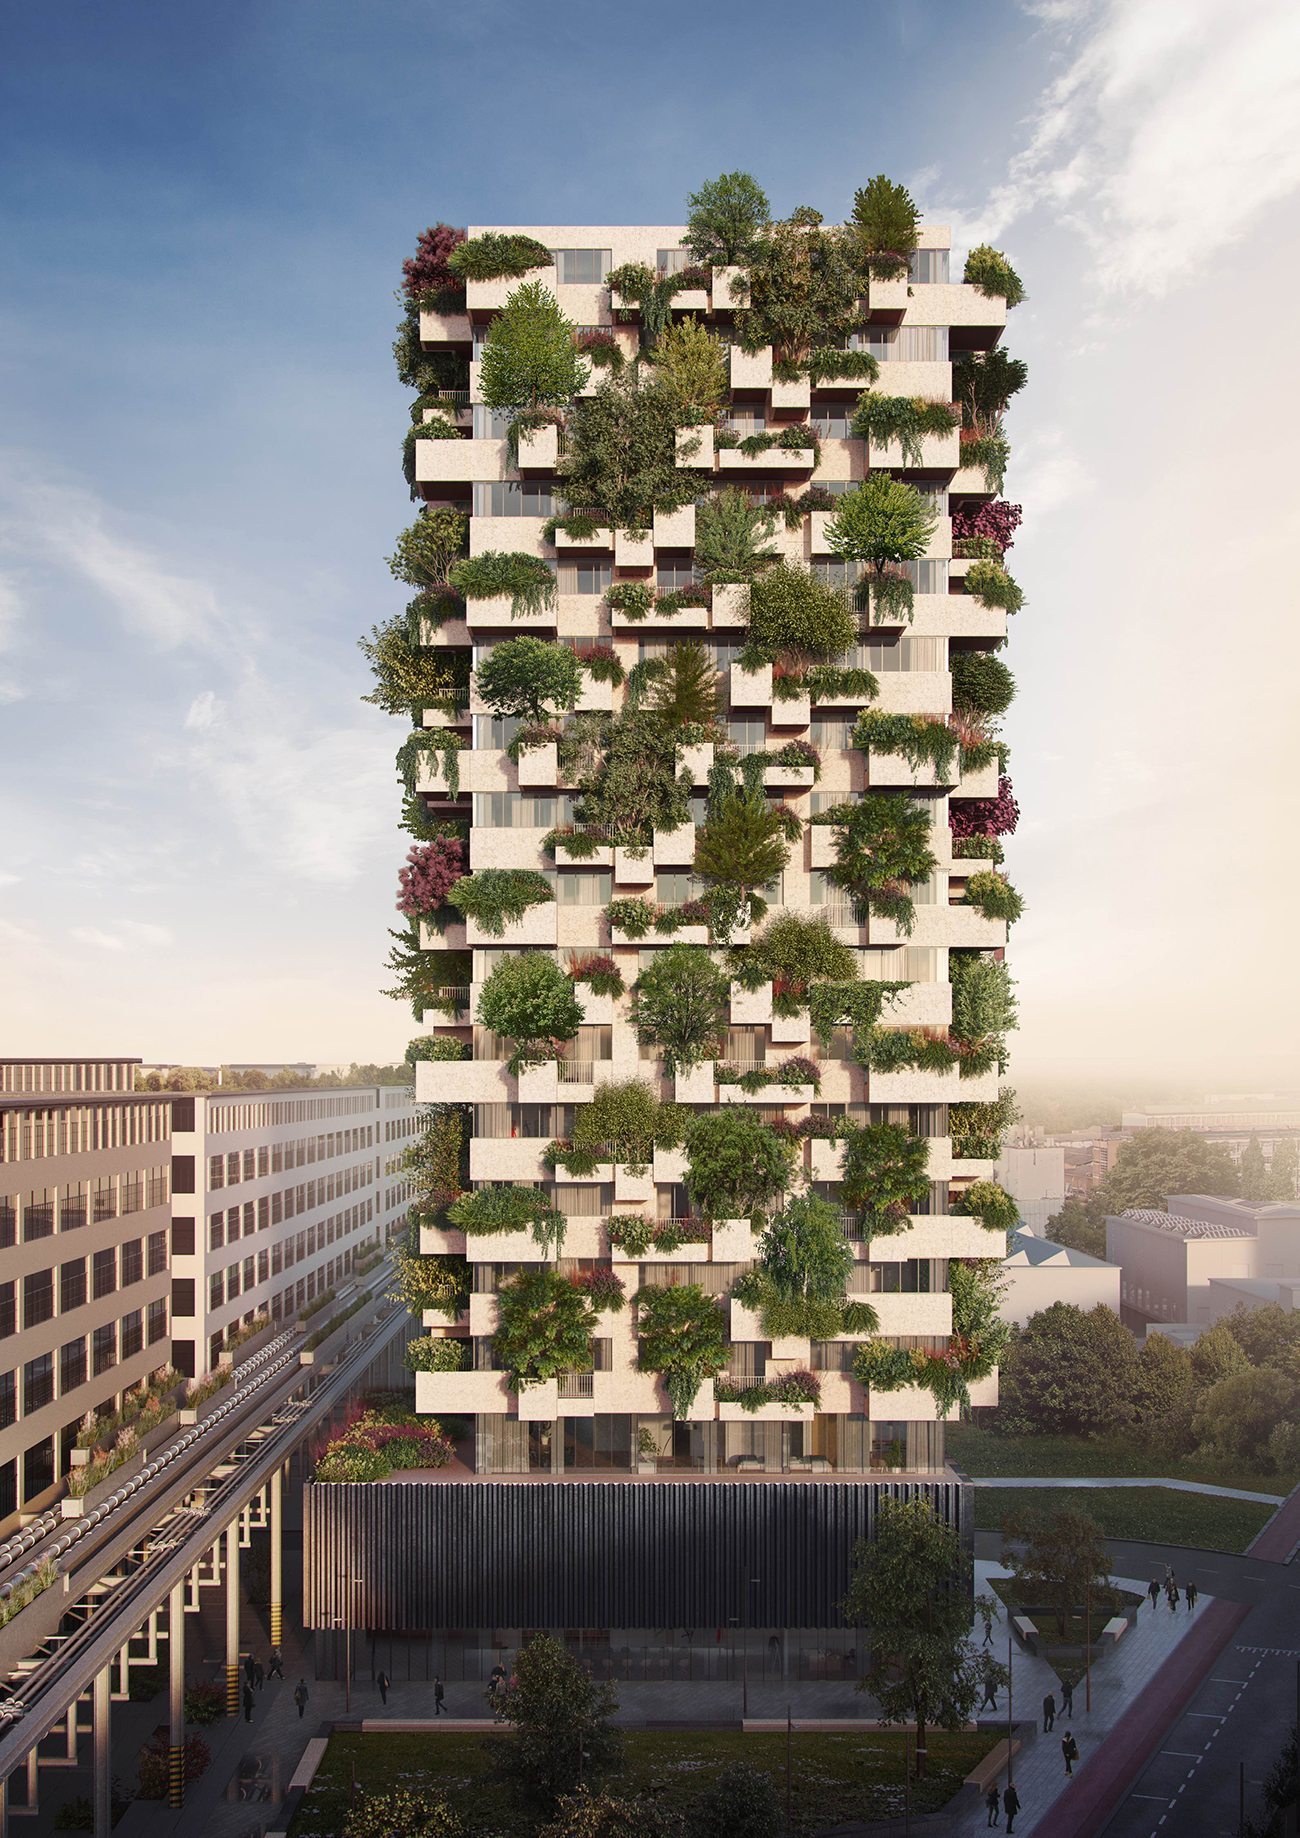 Overall, the Trudo Vertical Forest residential tower will reach a height of 75 metres and be able to host as many as 125 trees of various species on the whole of its four facades, to which about 5,200 shrubs and plants of smaller dimensions will be added.